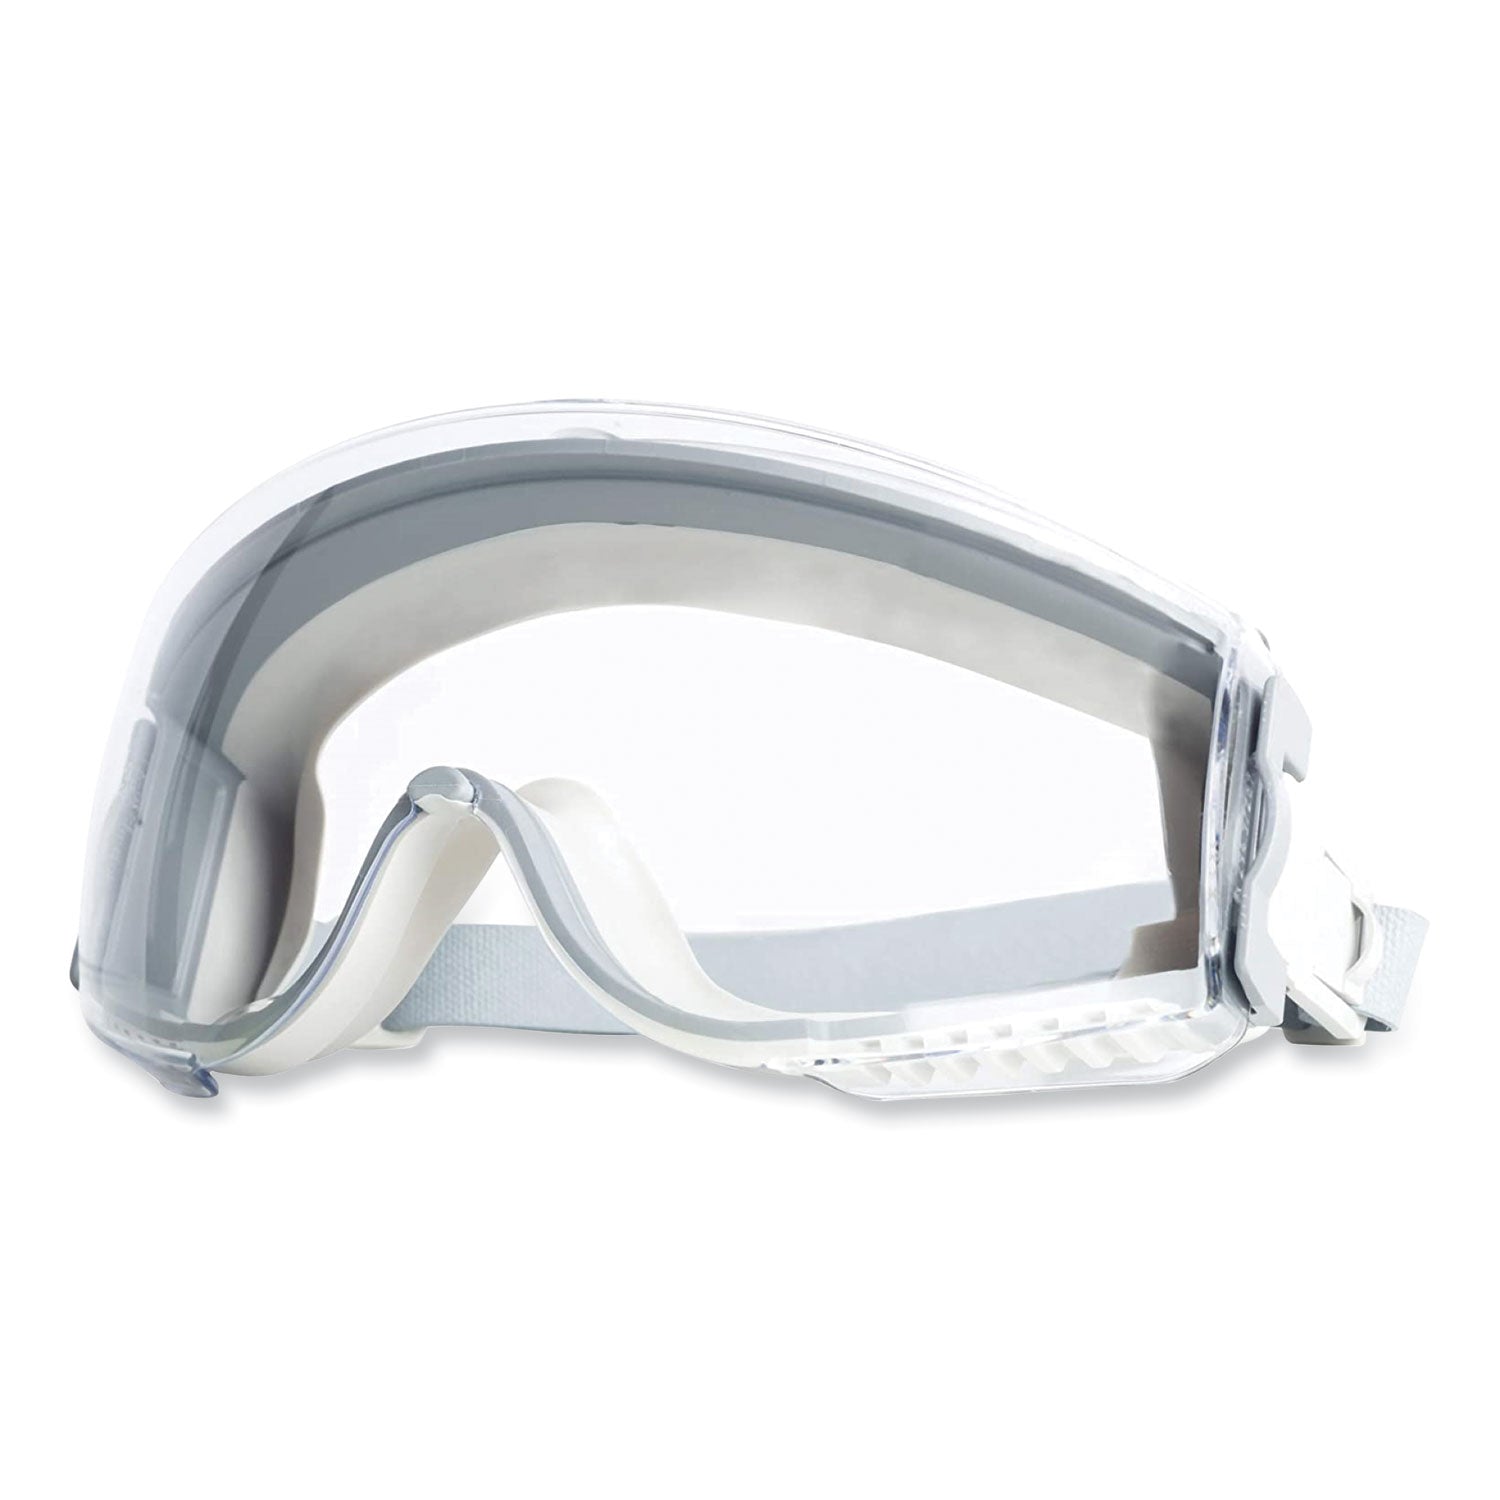 stealth-safety-goggles-clear-hydroshield-anti-fog-anti-scratch-lens-clear-gray-frame_uvxs3960hs - 1